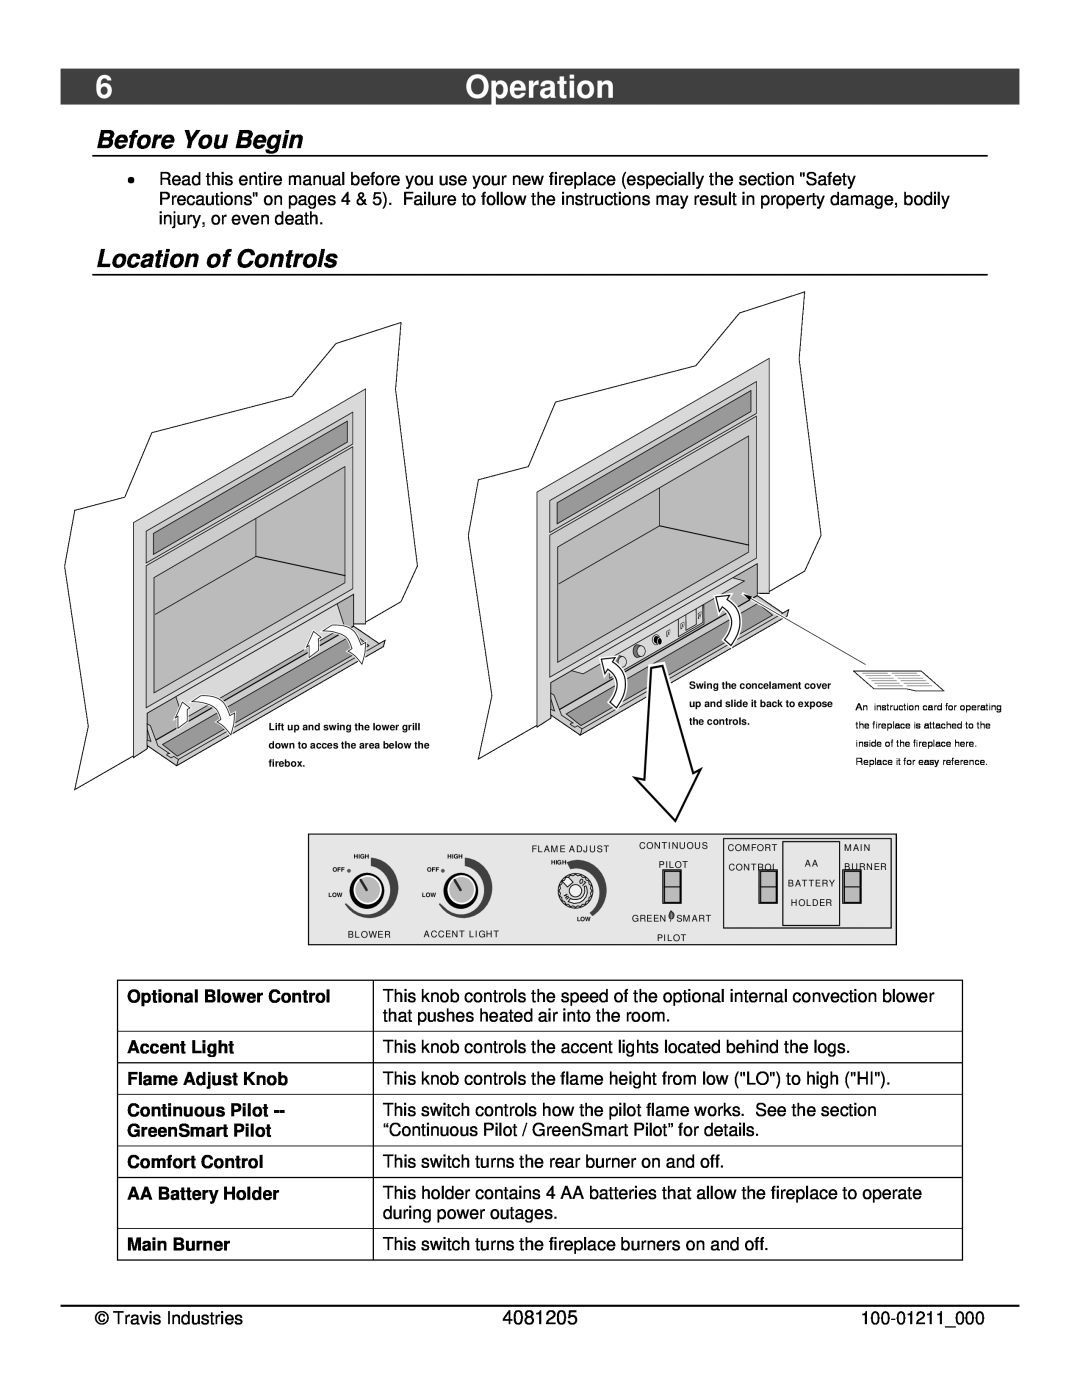 FireplaceXtrordinair 564 6Operation, Before You Begin, Location of Controls, 4081205, Optional Blower Control, Main Burner 